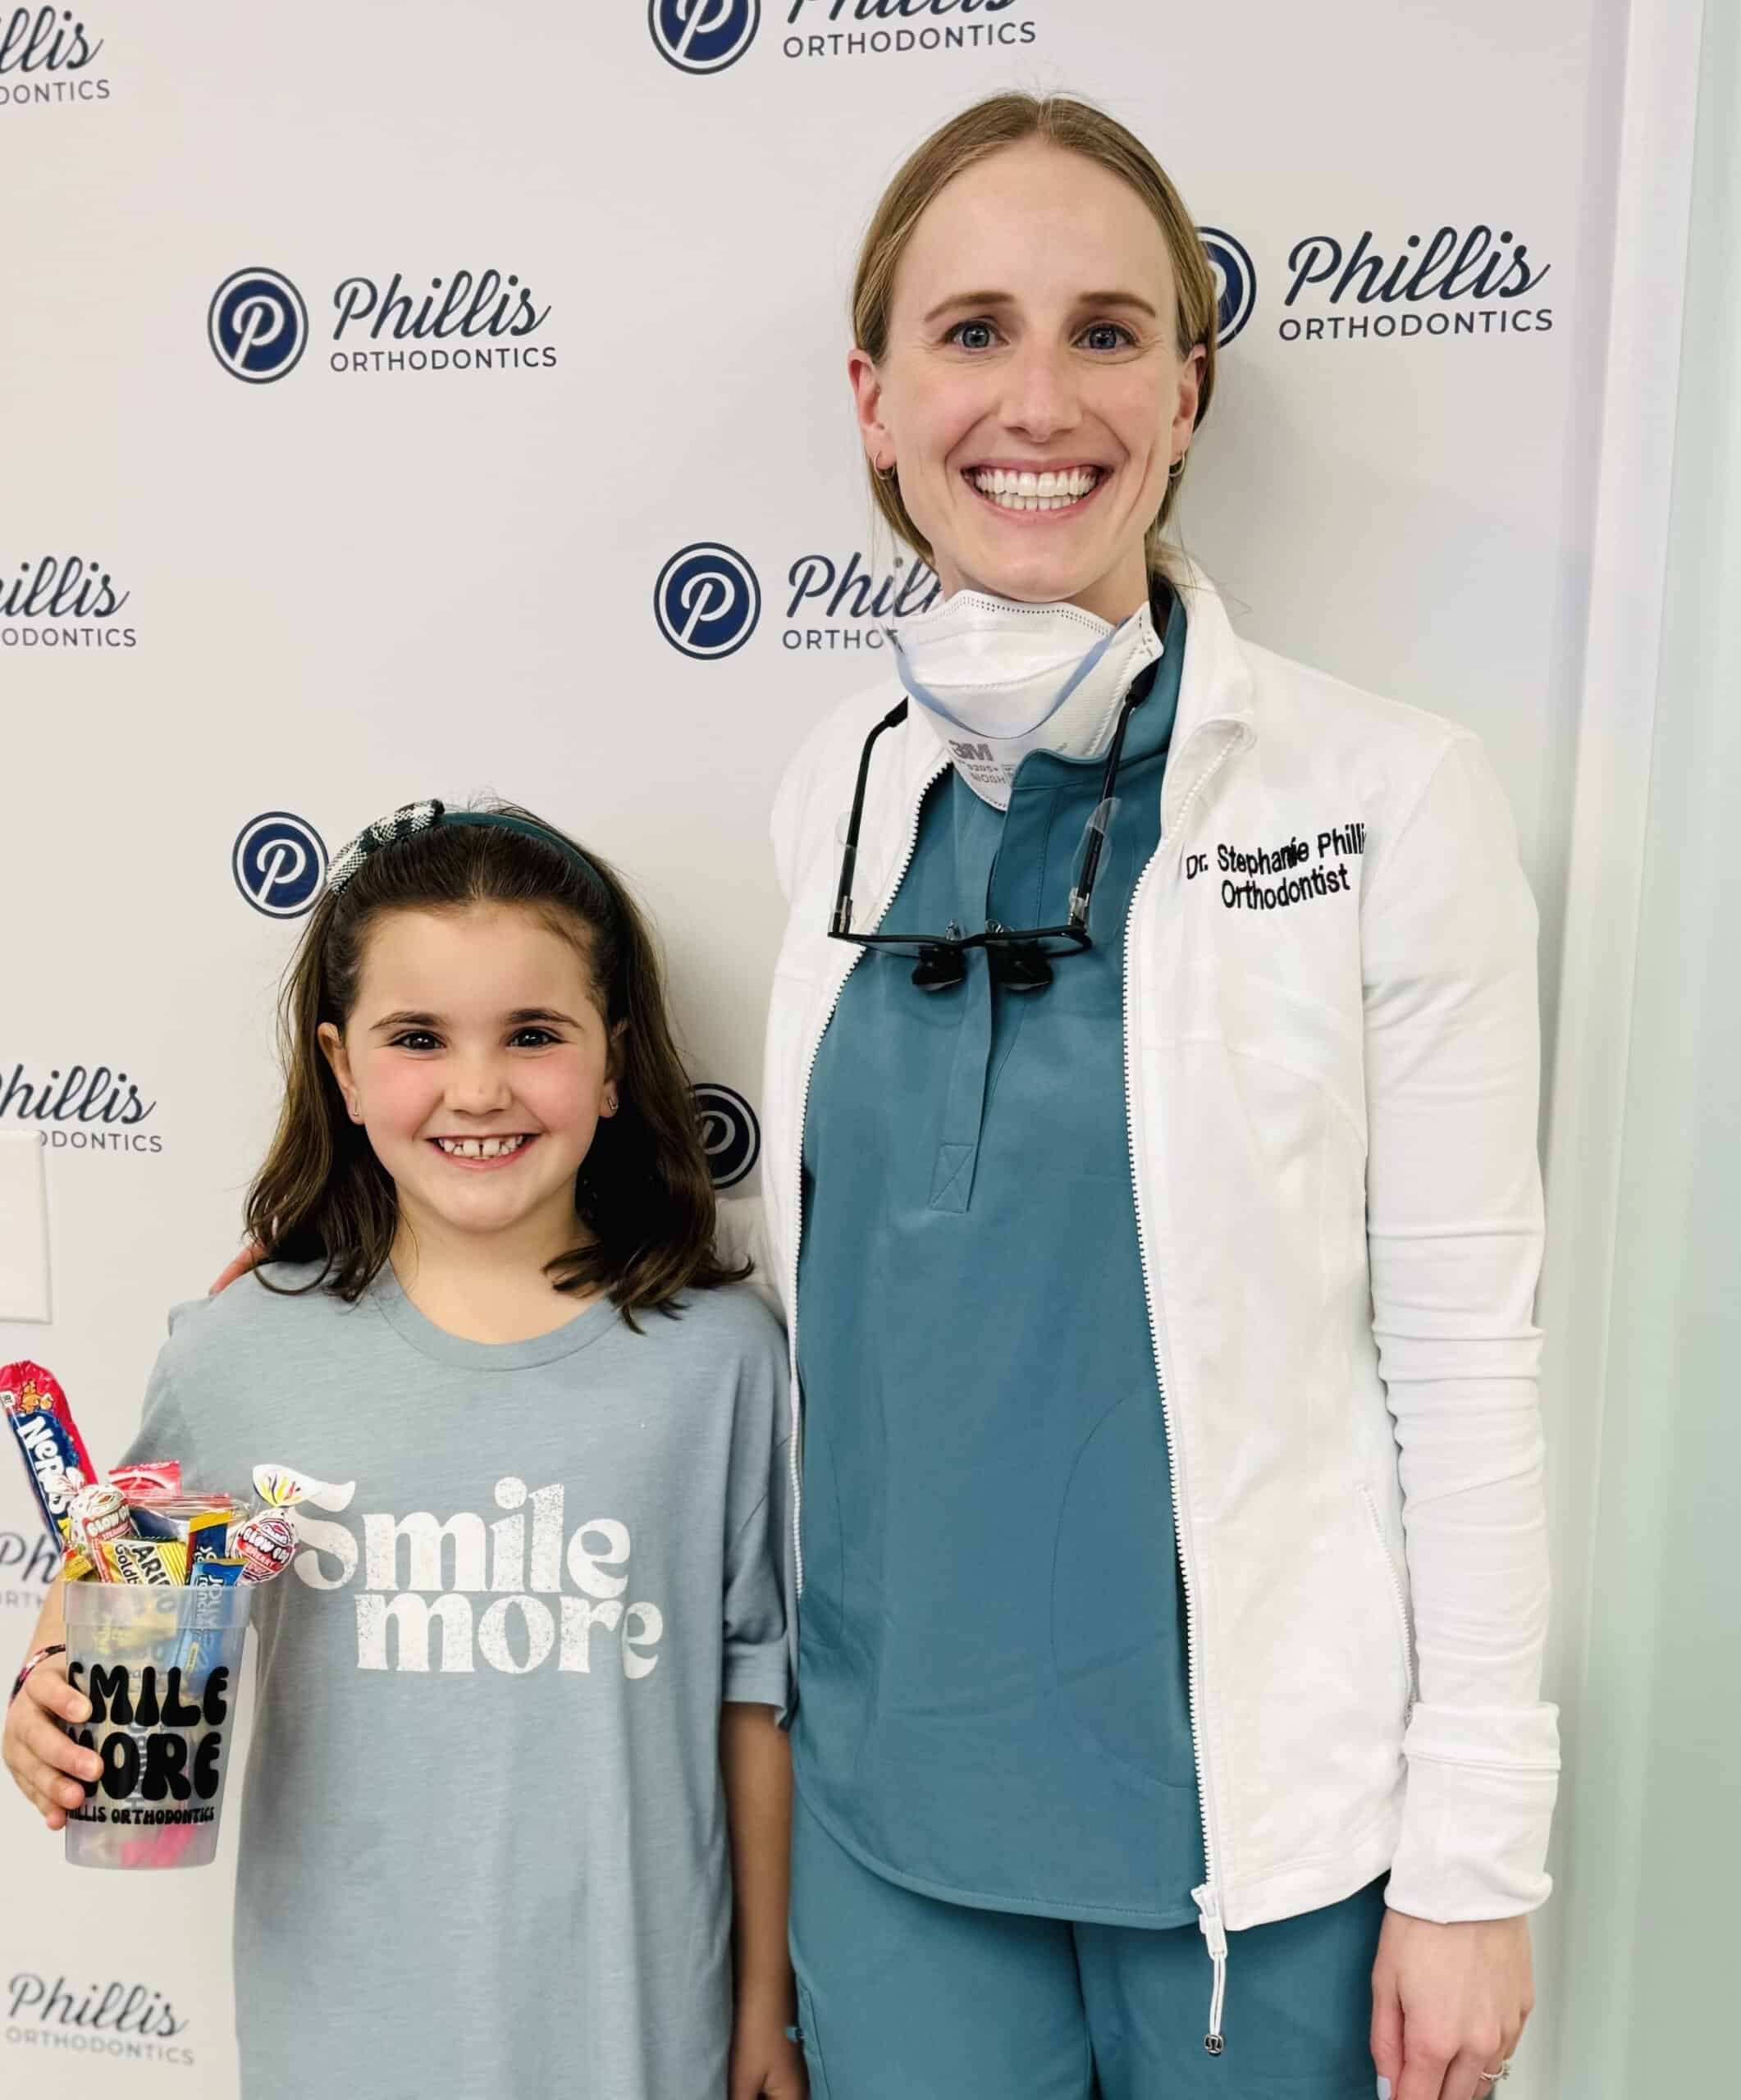 Dr. Stephanie Phillis at Phillis Orthodontics in Chelmsford, MA